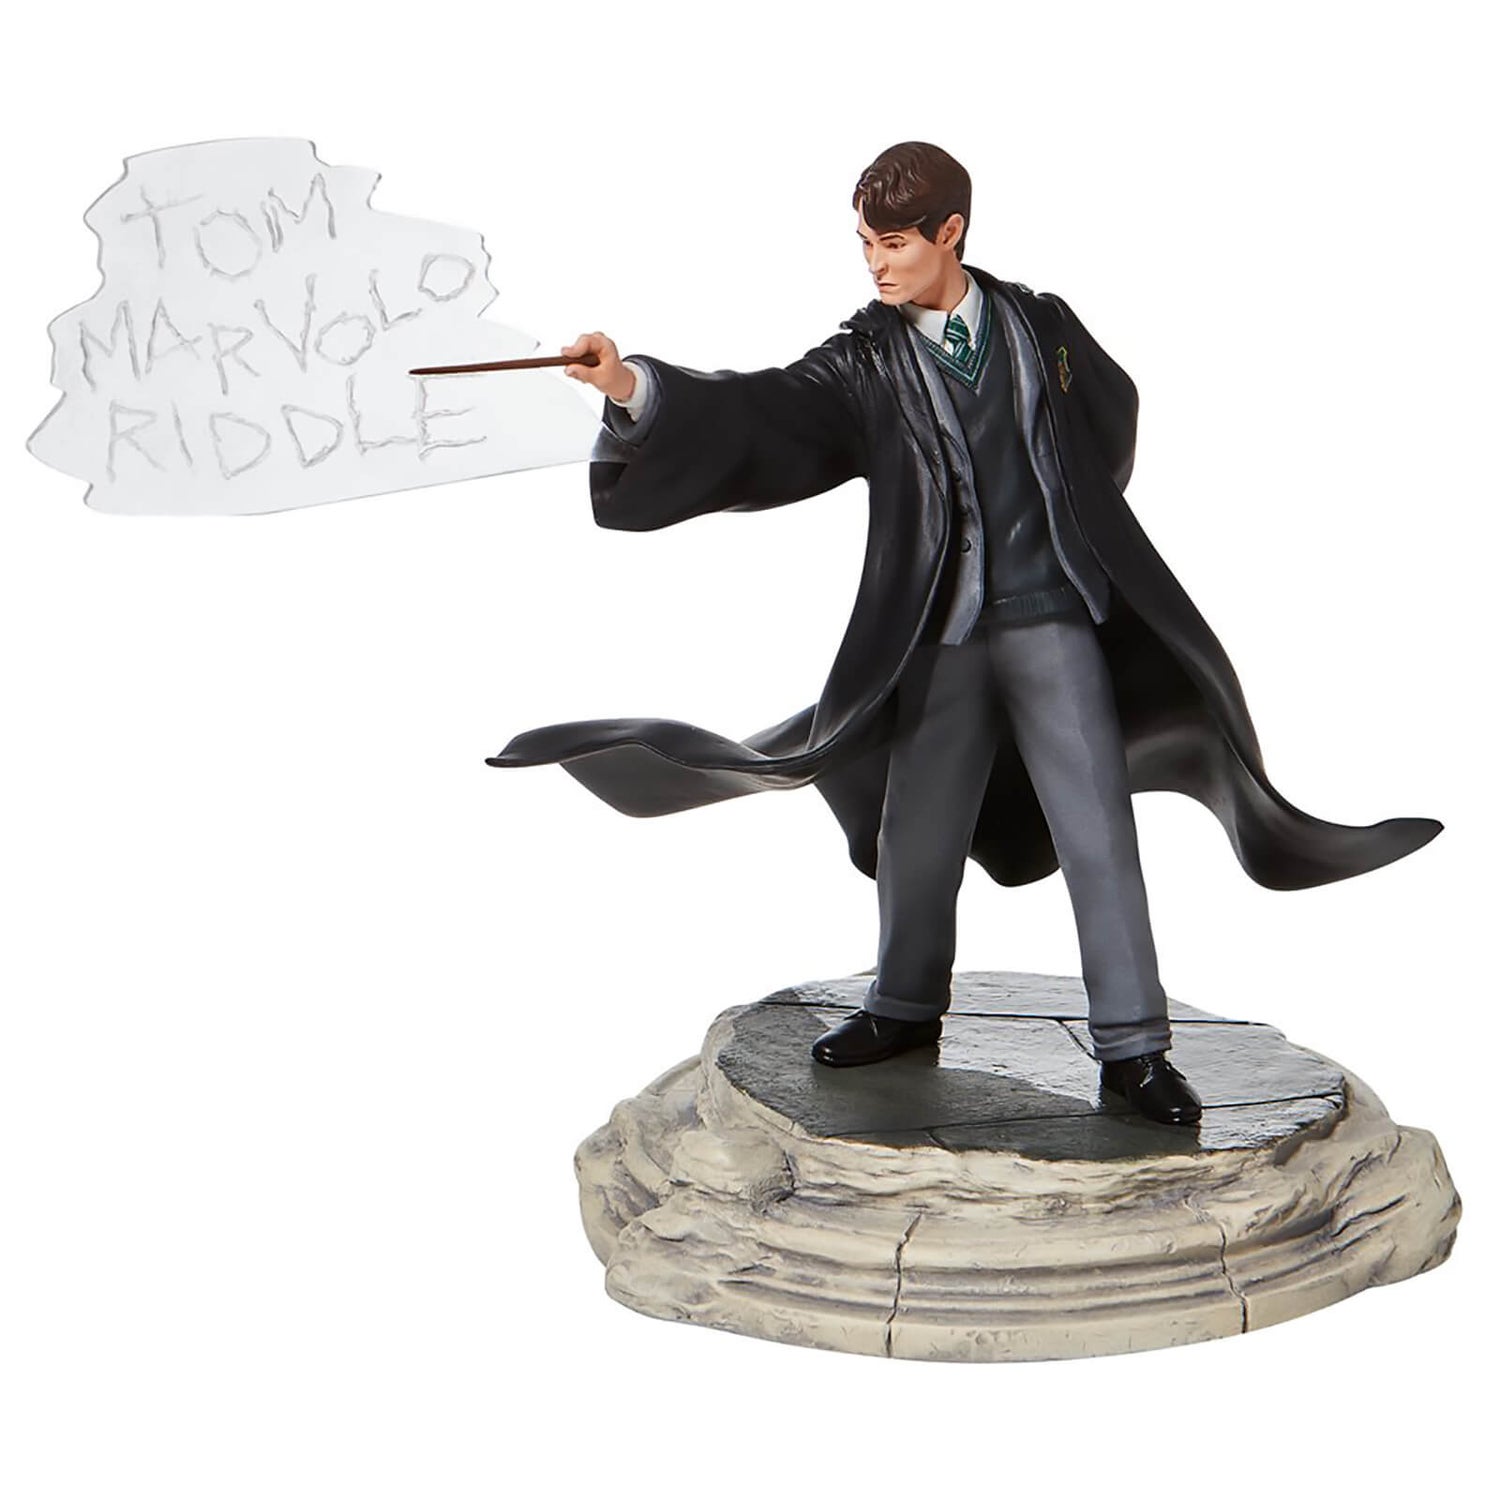 Buildable World of Harry Potter - Tom Riddle calls forth the